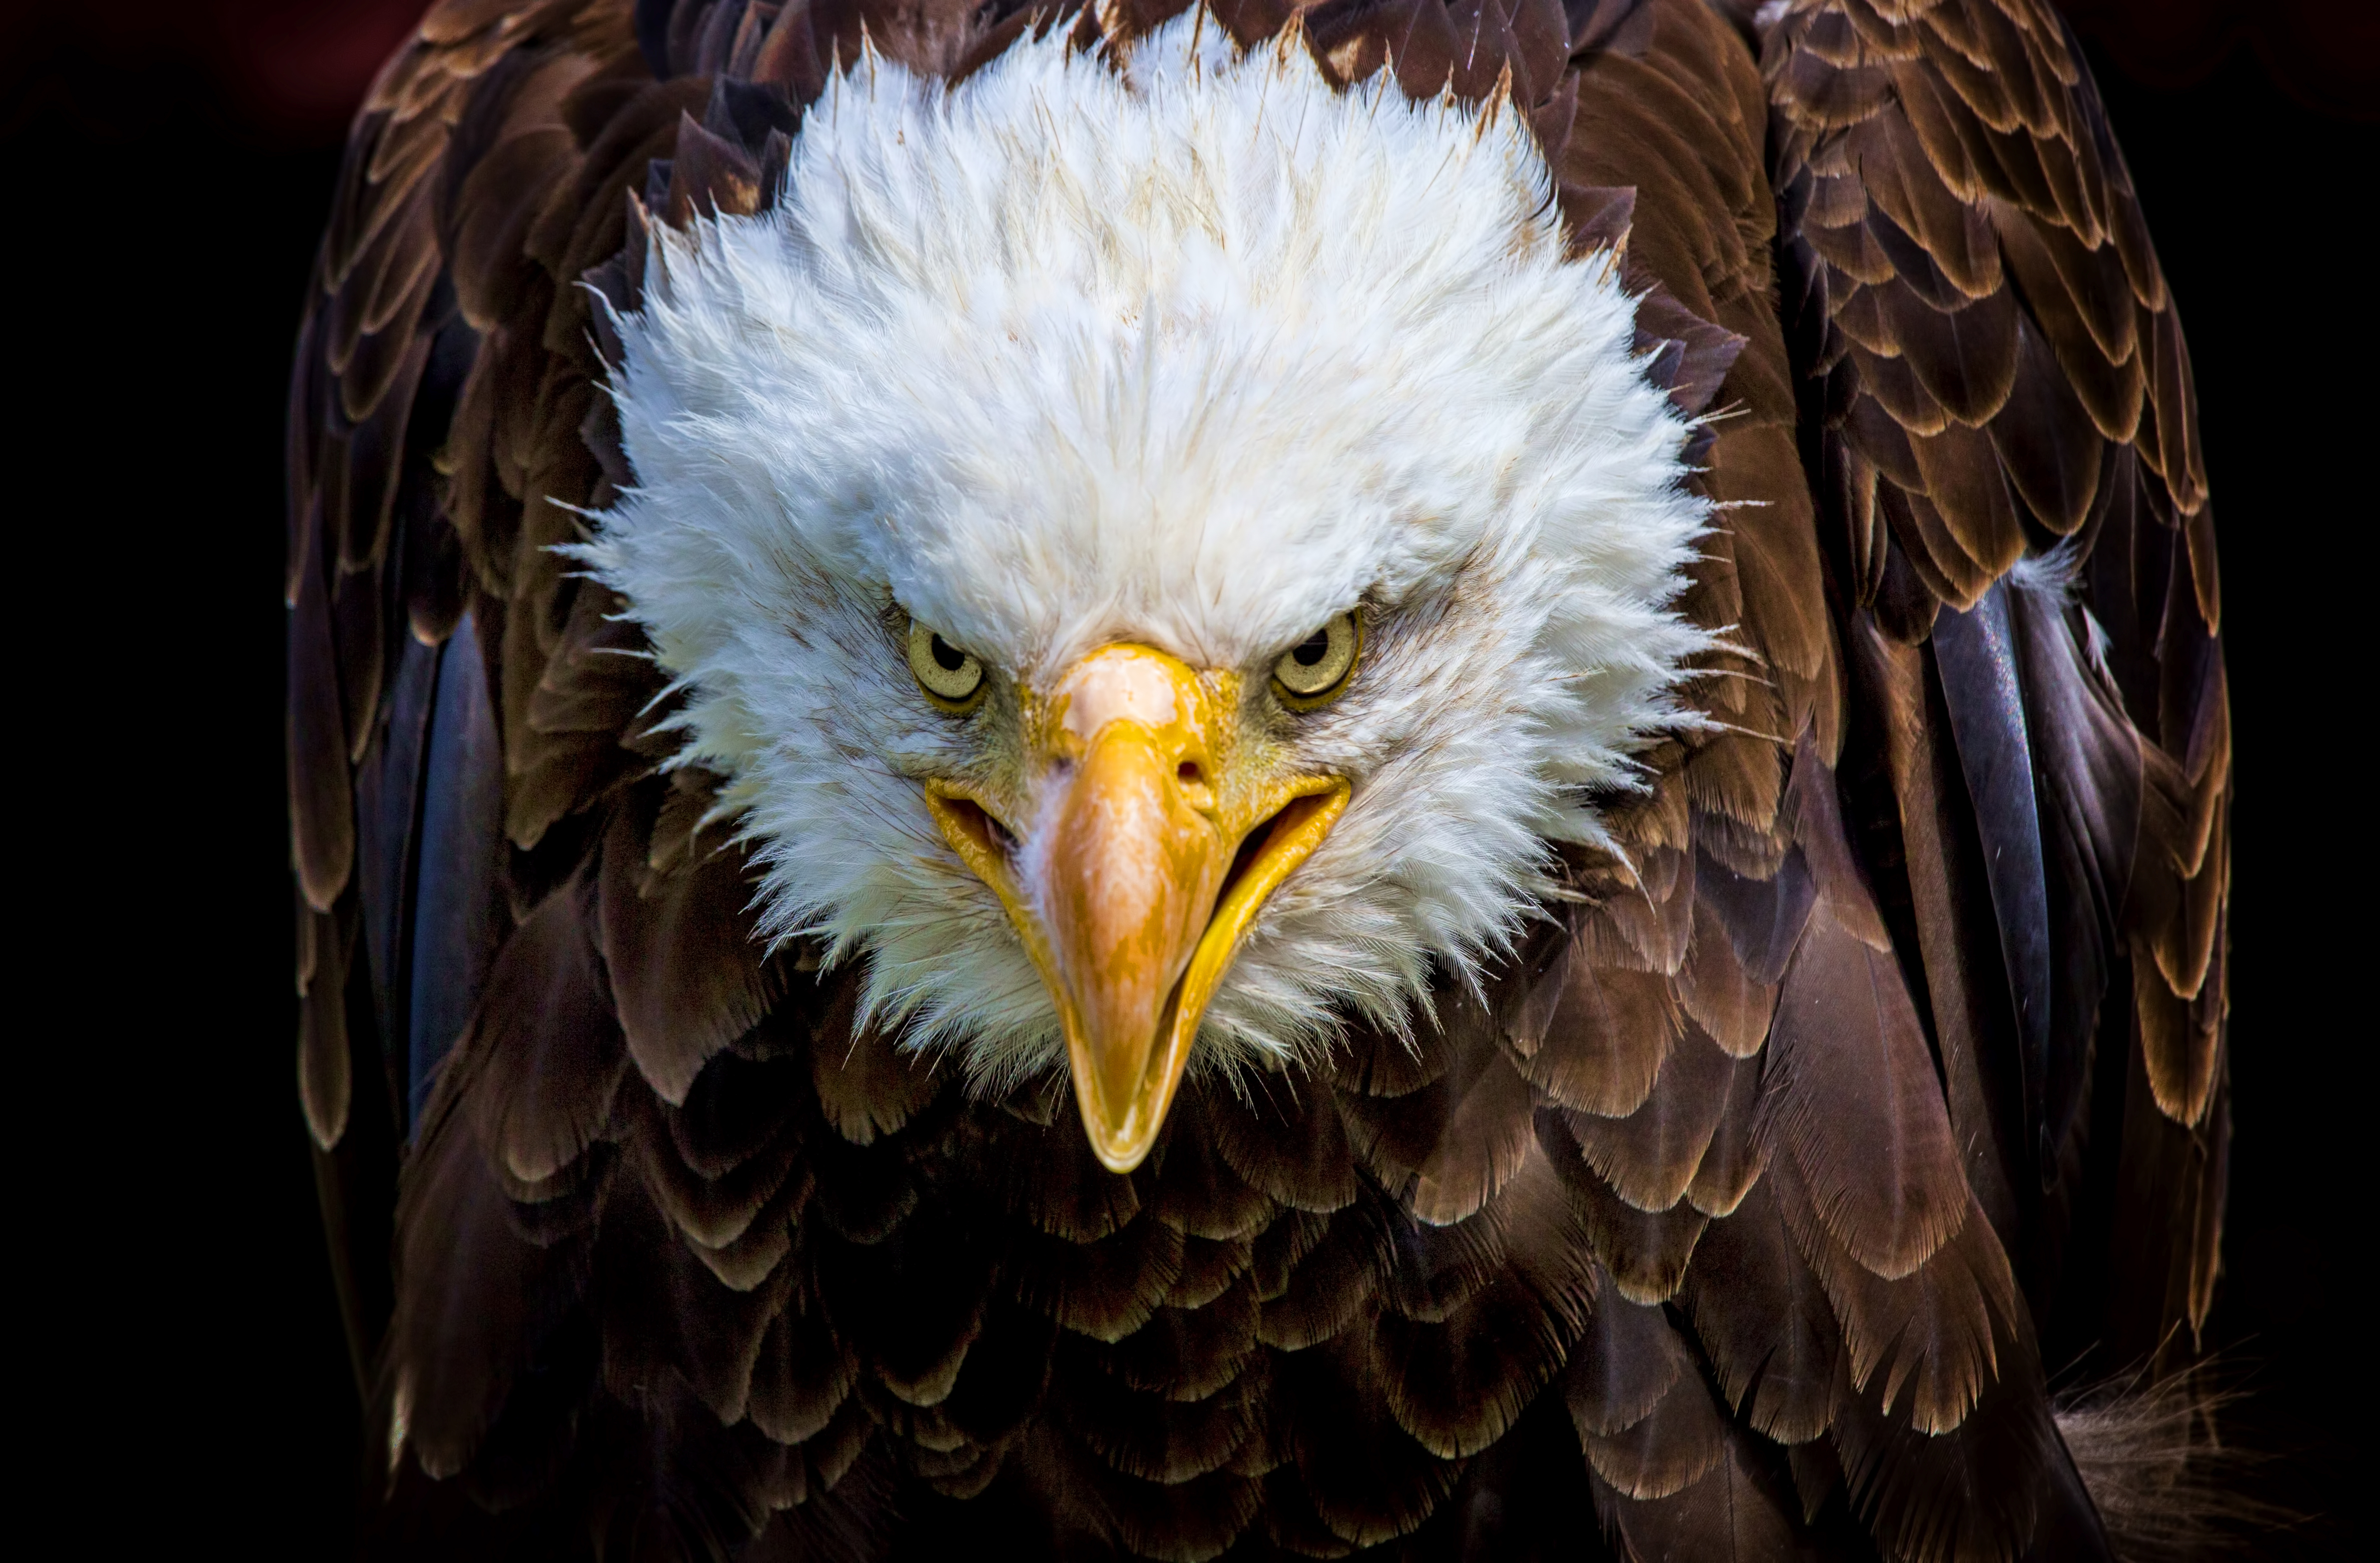 eyes of the eagle